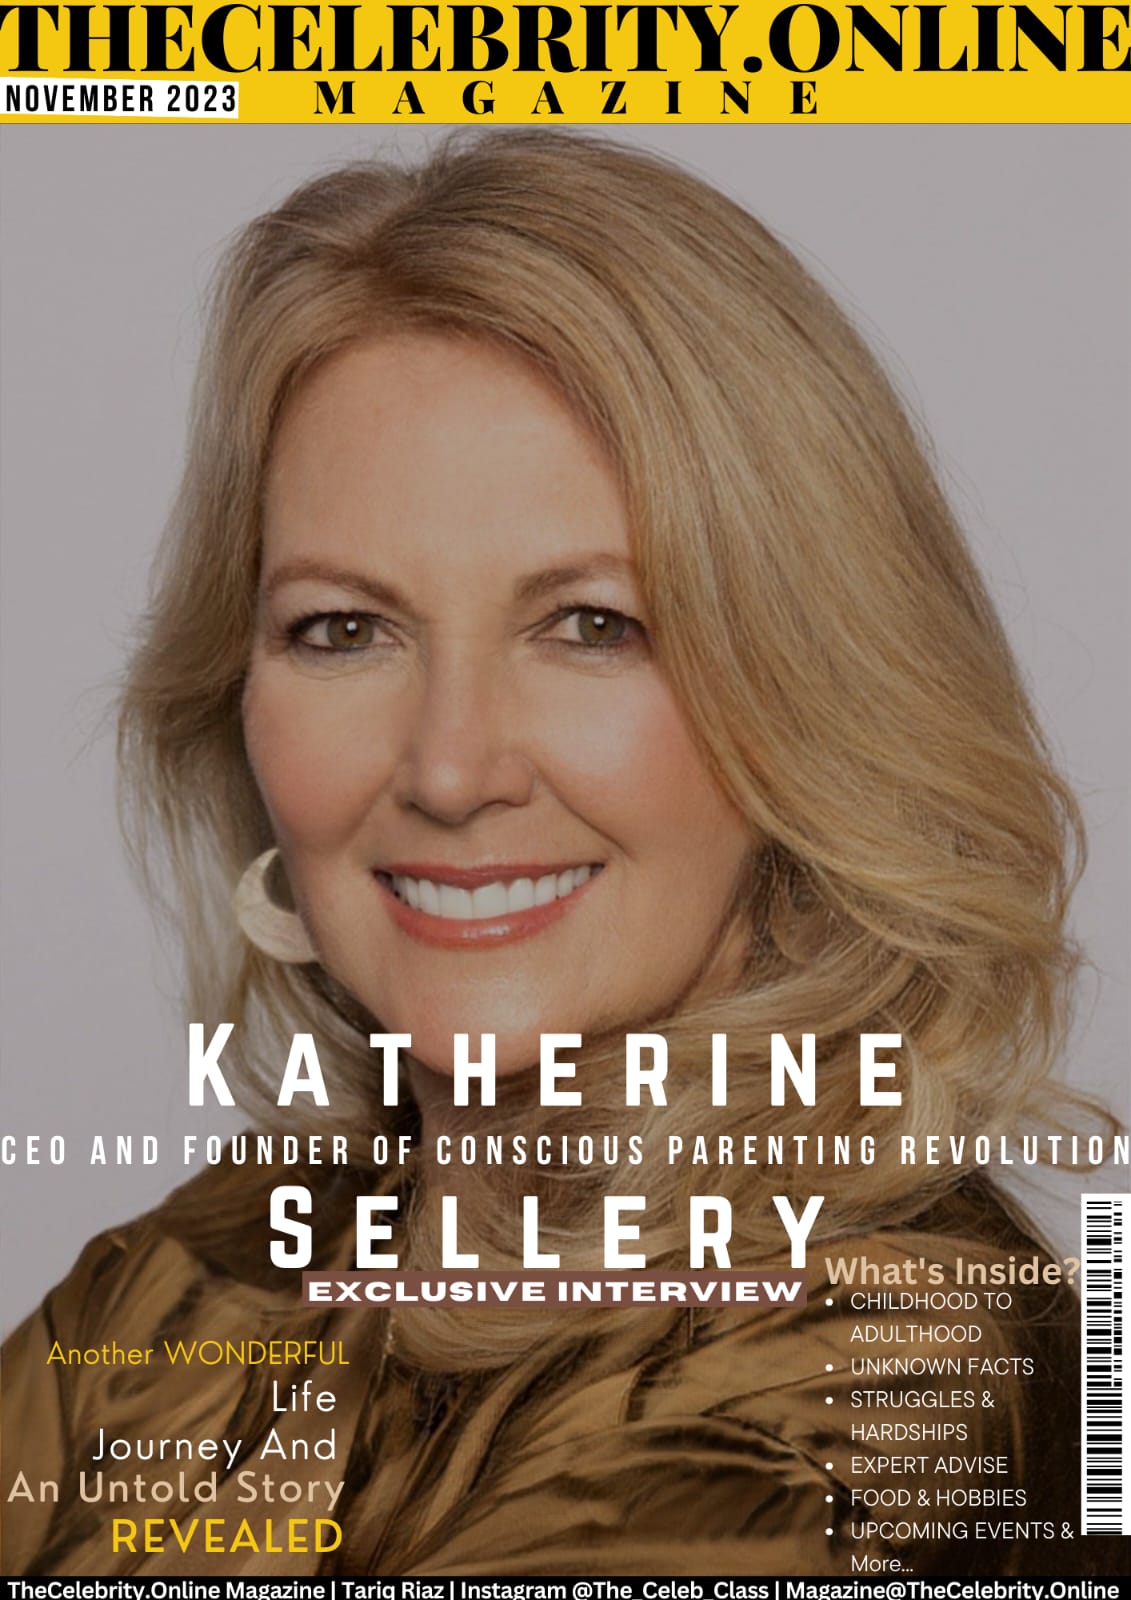 Katherine Sellery, CEO and Founder of Conscious Parenting Revolution – Exclusive Interview